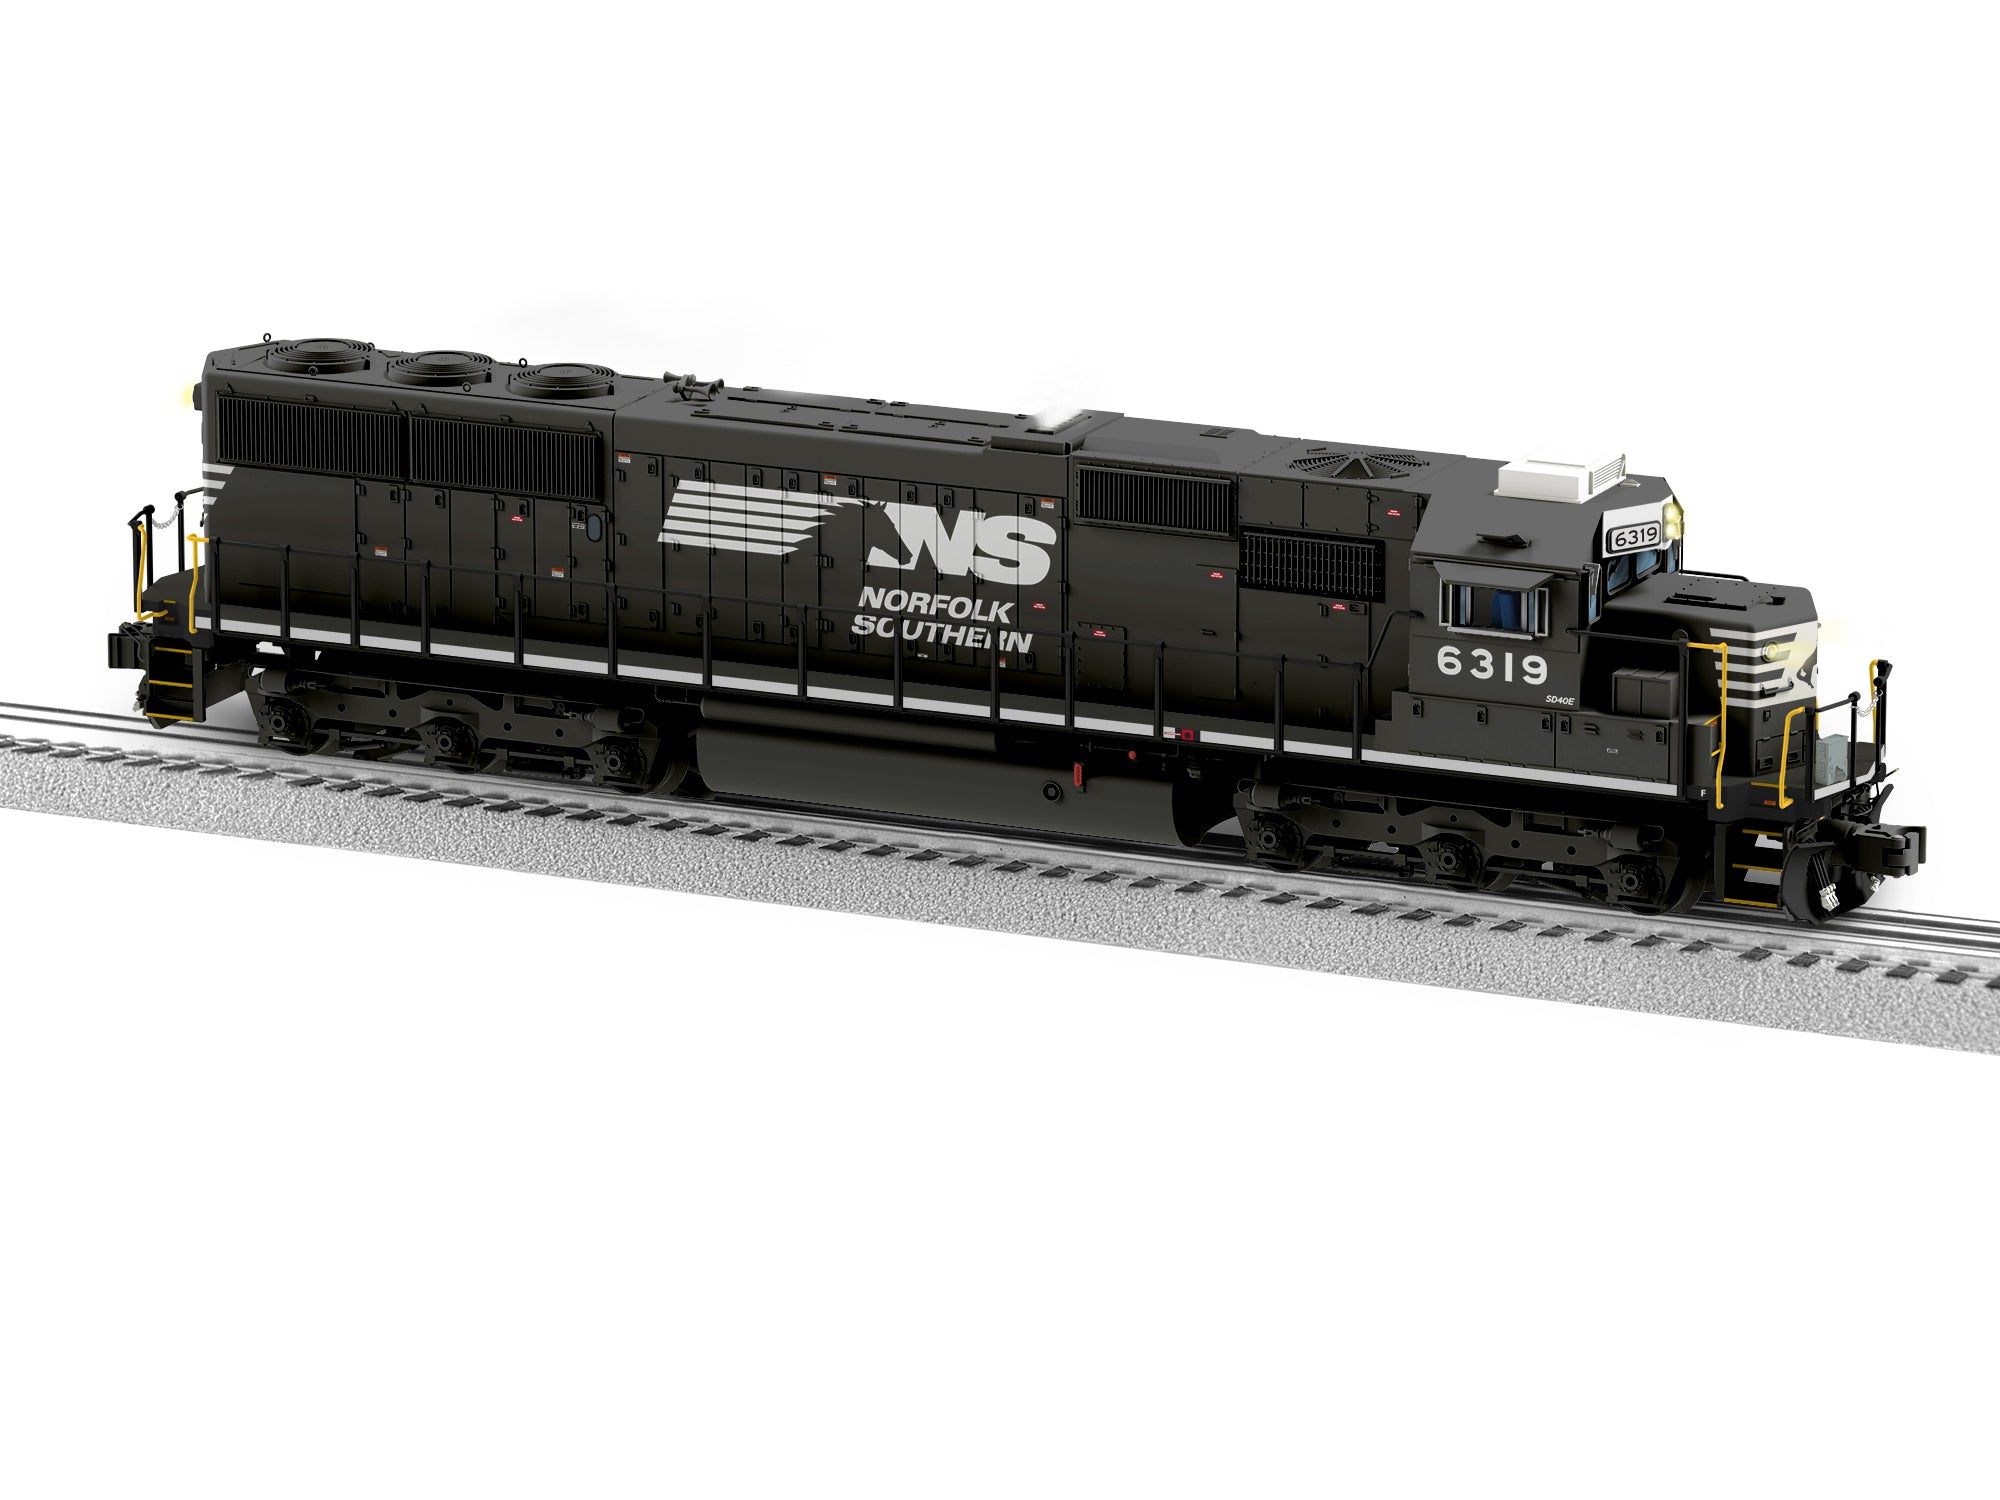 Lionel 2433282 - Legacy SD40E Diesel Engine "Norfolk Southern" #6319